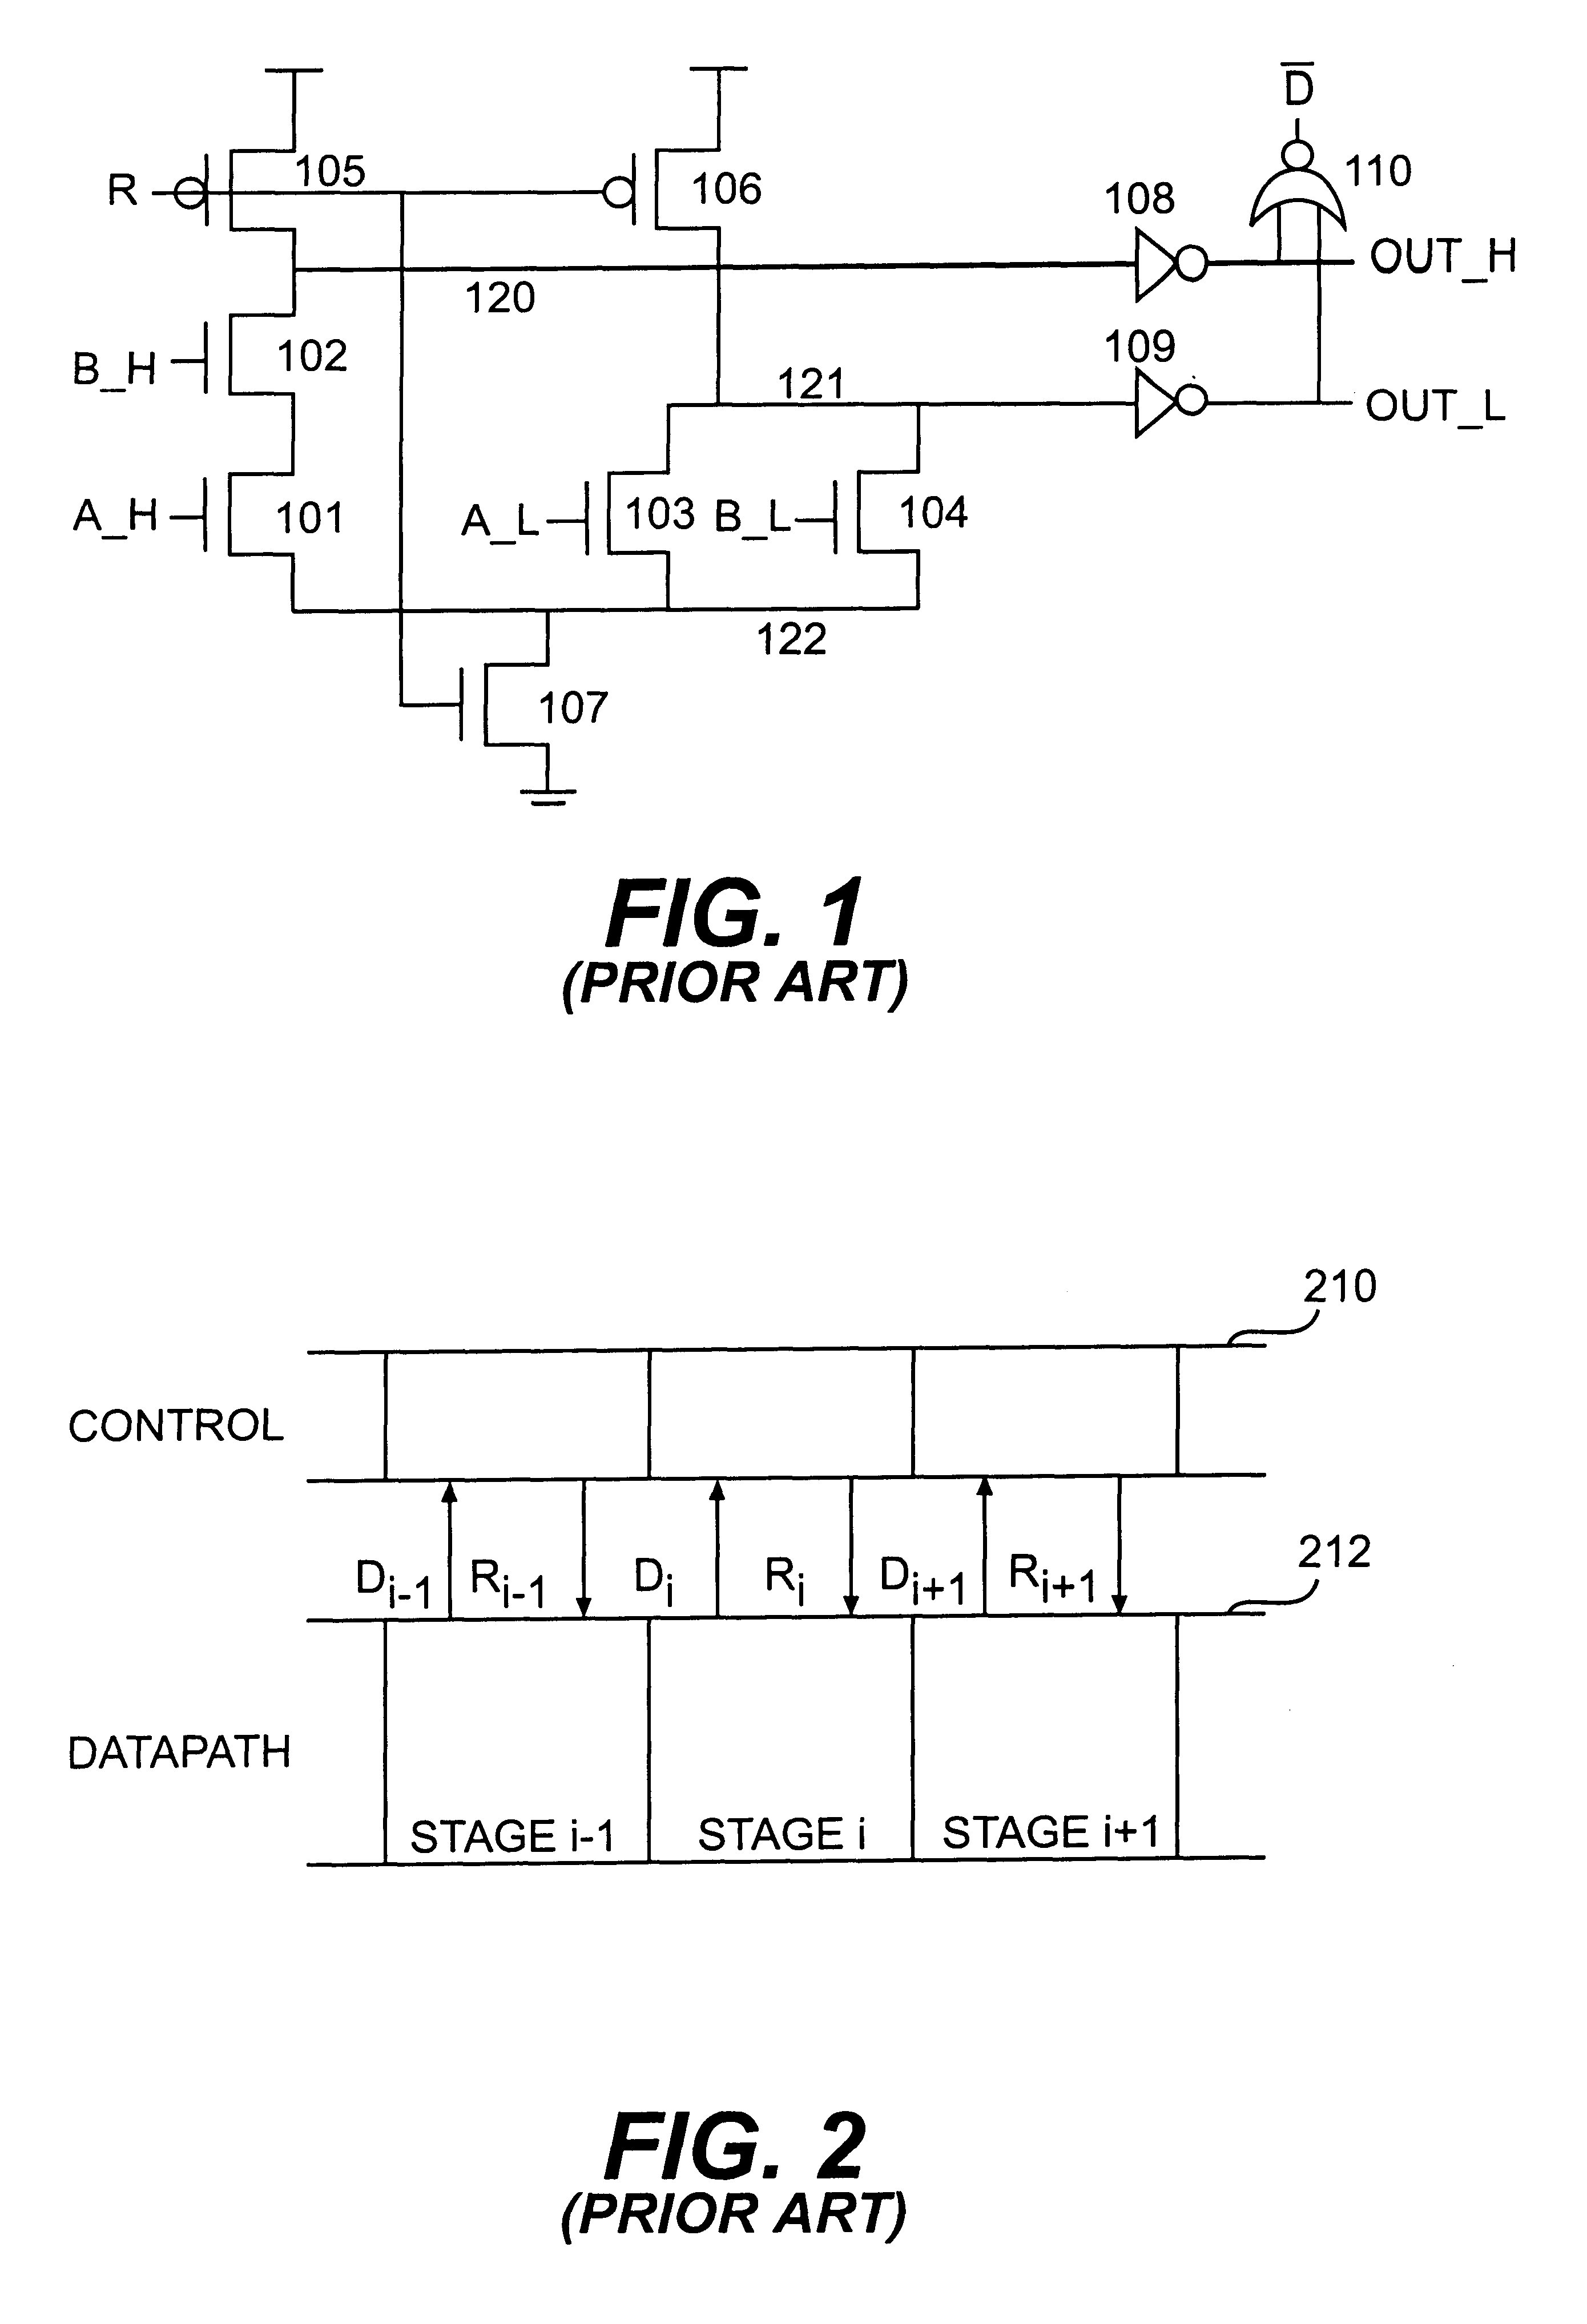 Apparatus and methods for high throughput self-timed domino circuits